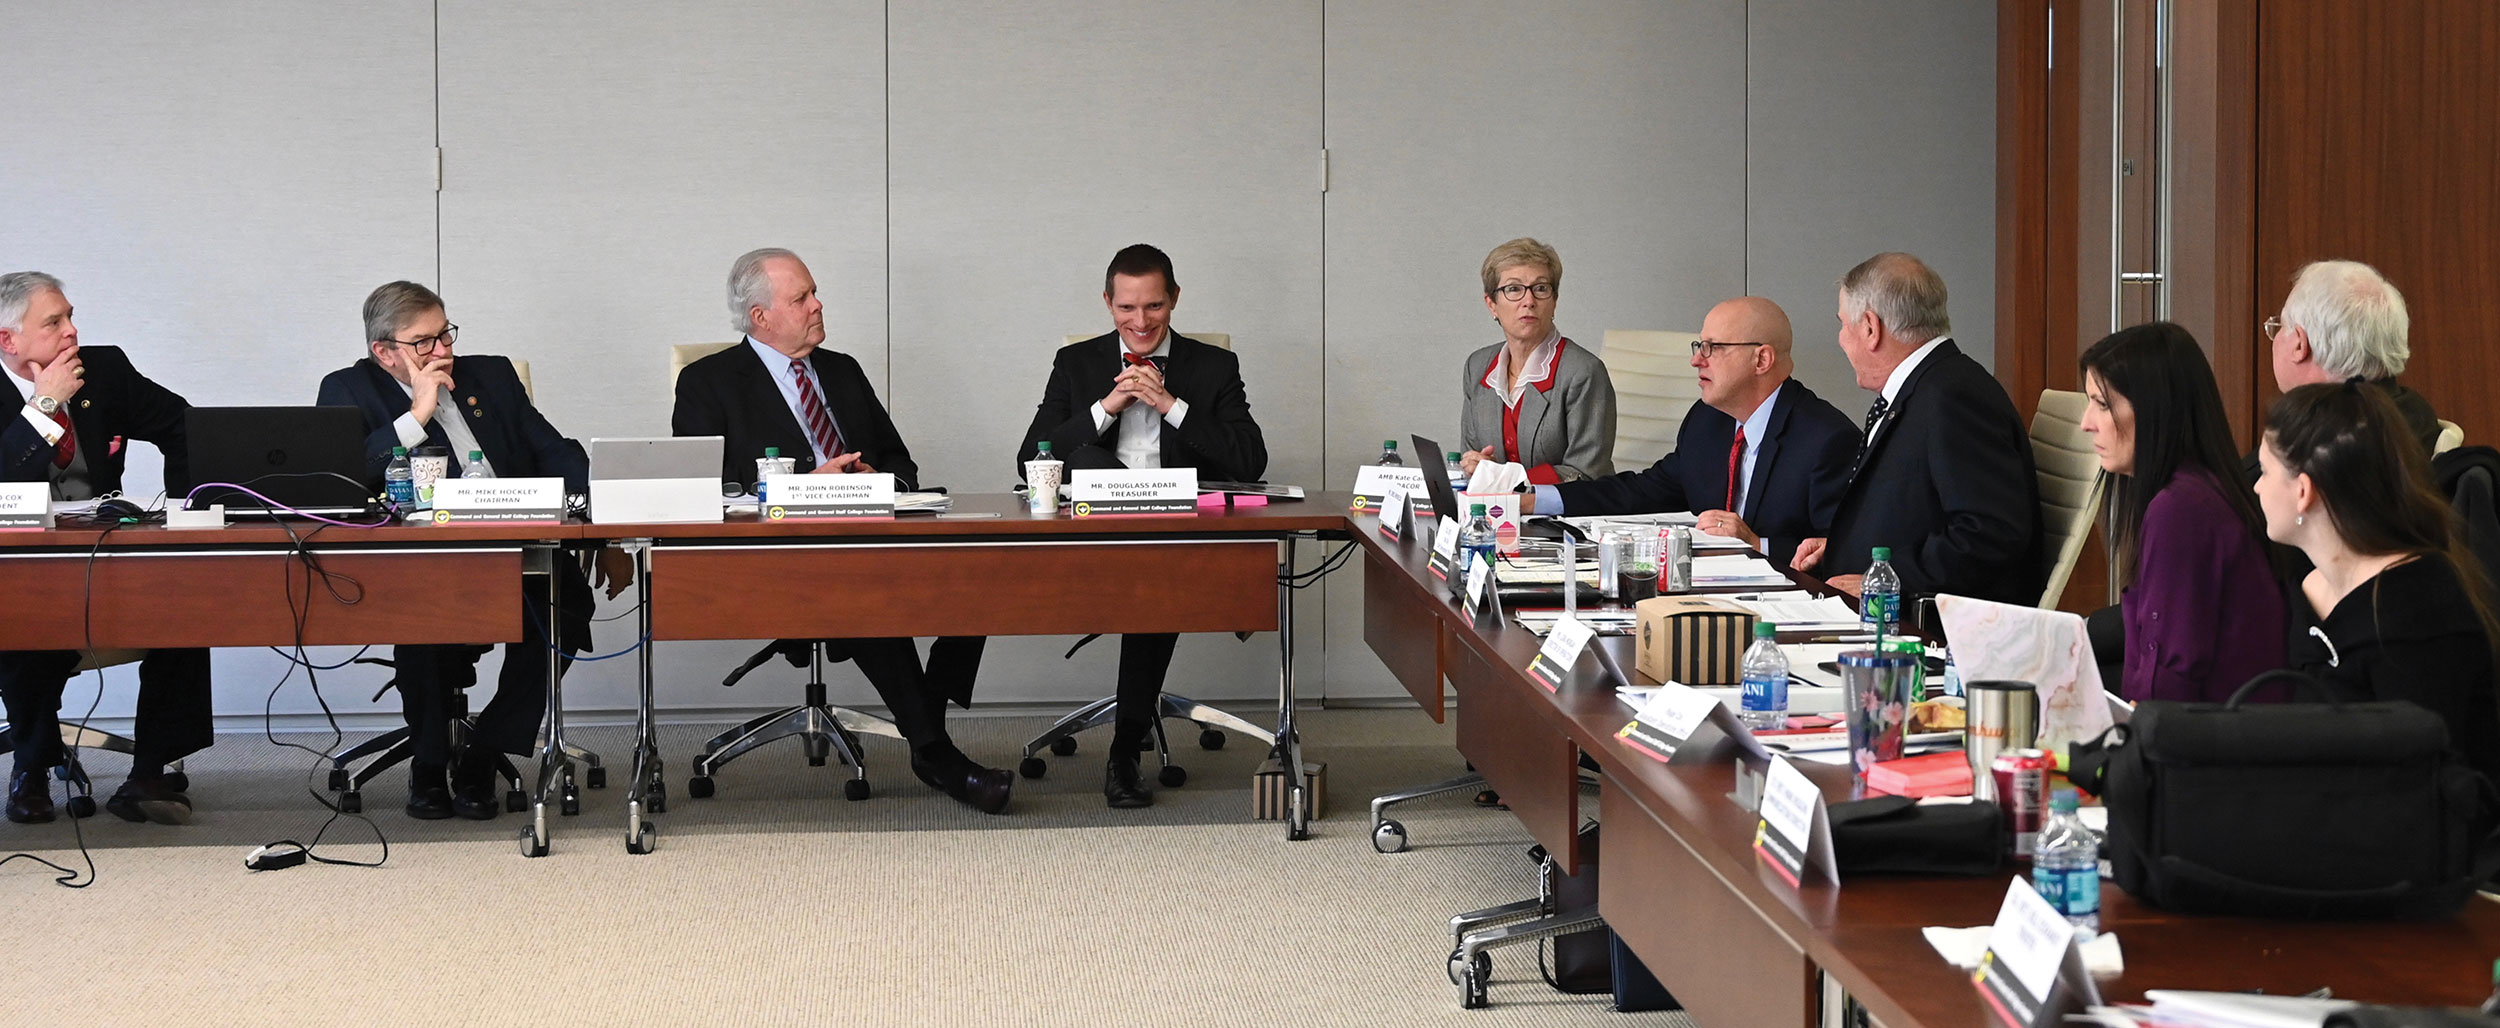 Ambassador Canavan visits with the members of the CGSC Foundation board of trustees during their quarterly meeting Dec. 4, 2019.